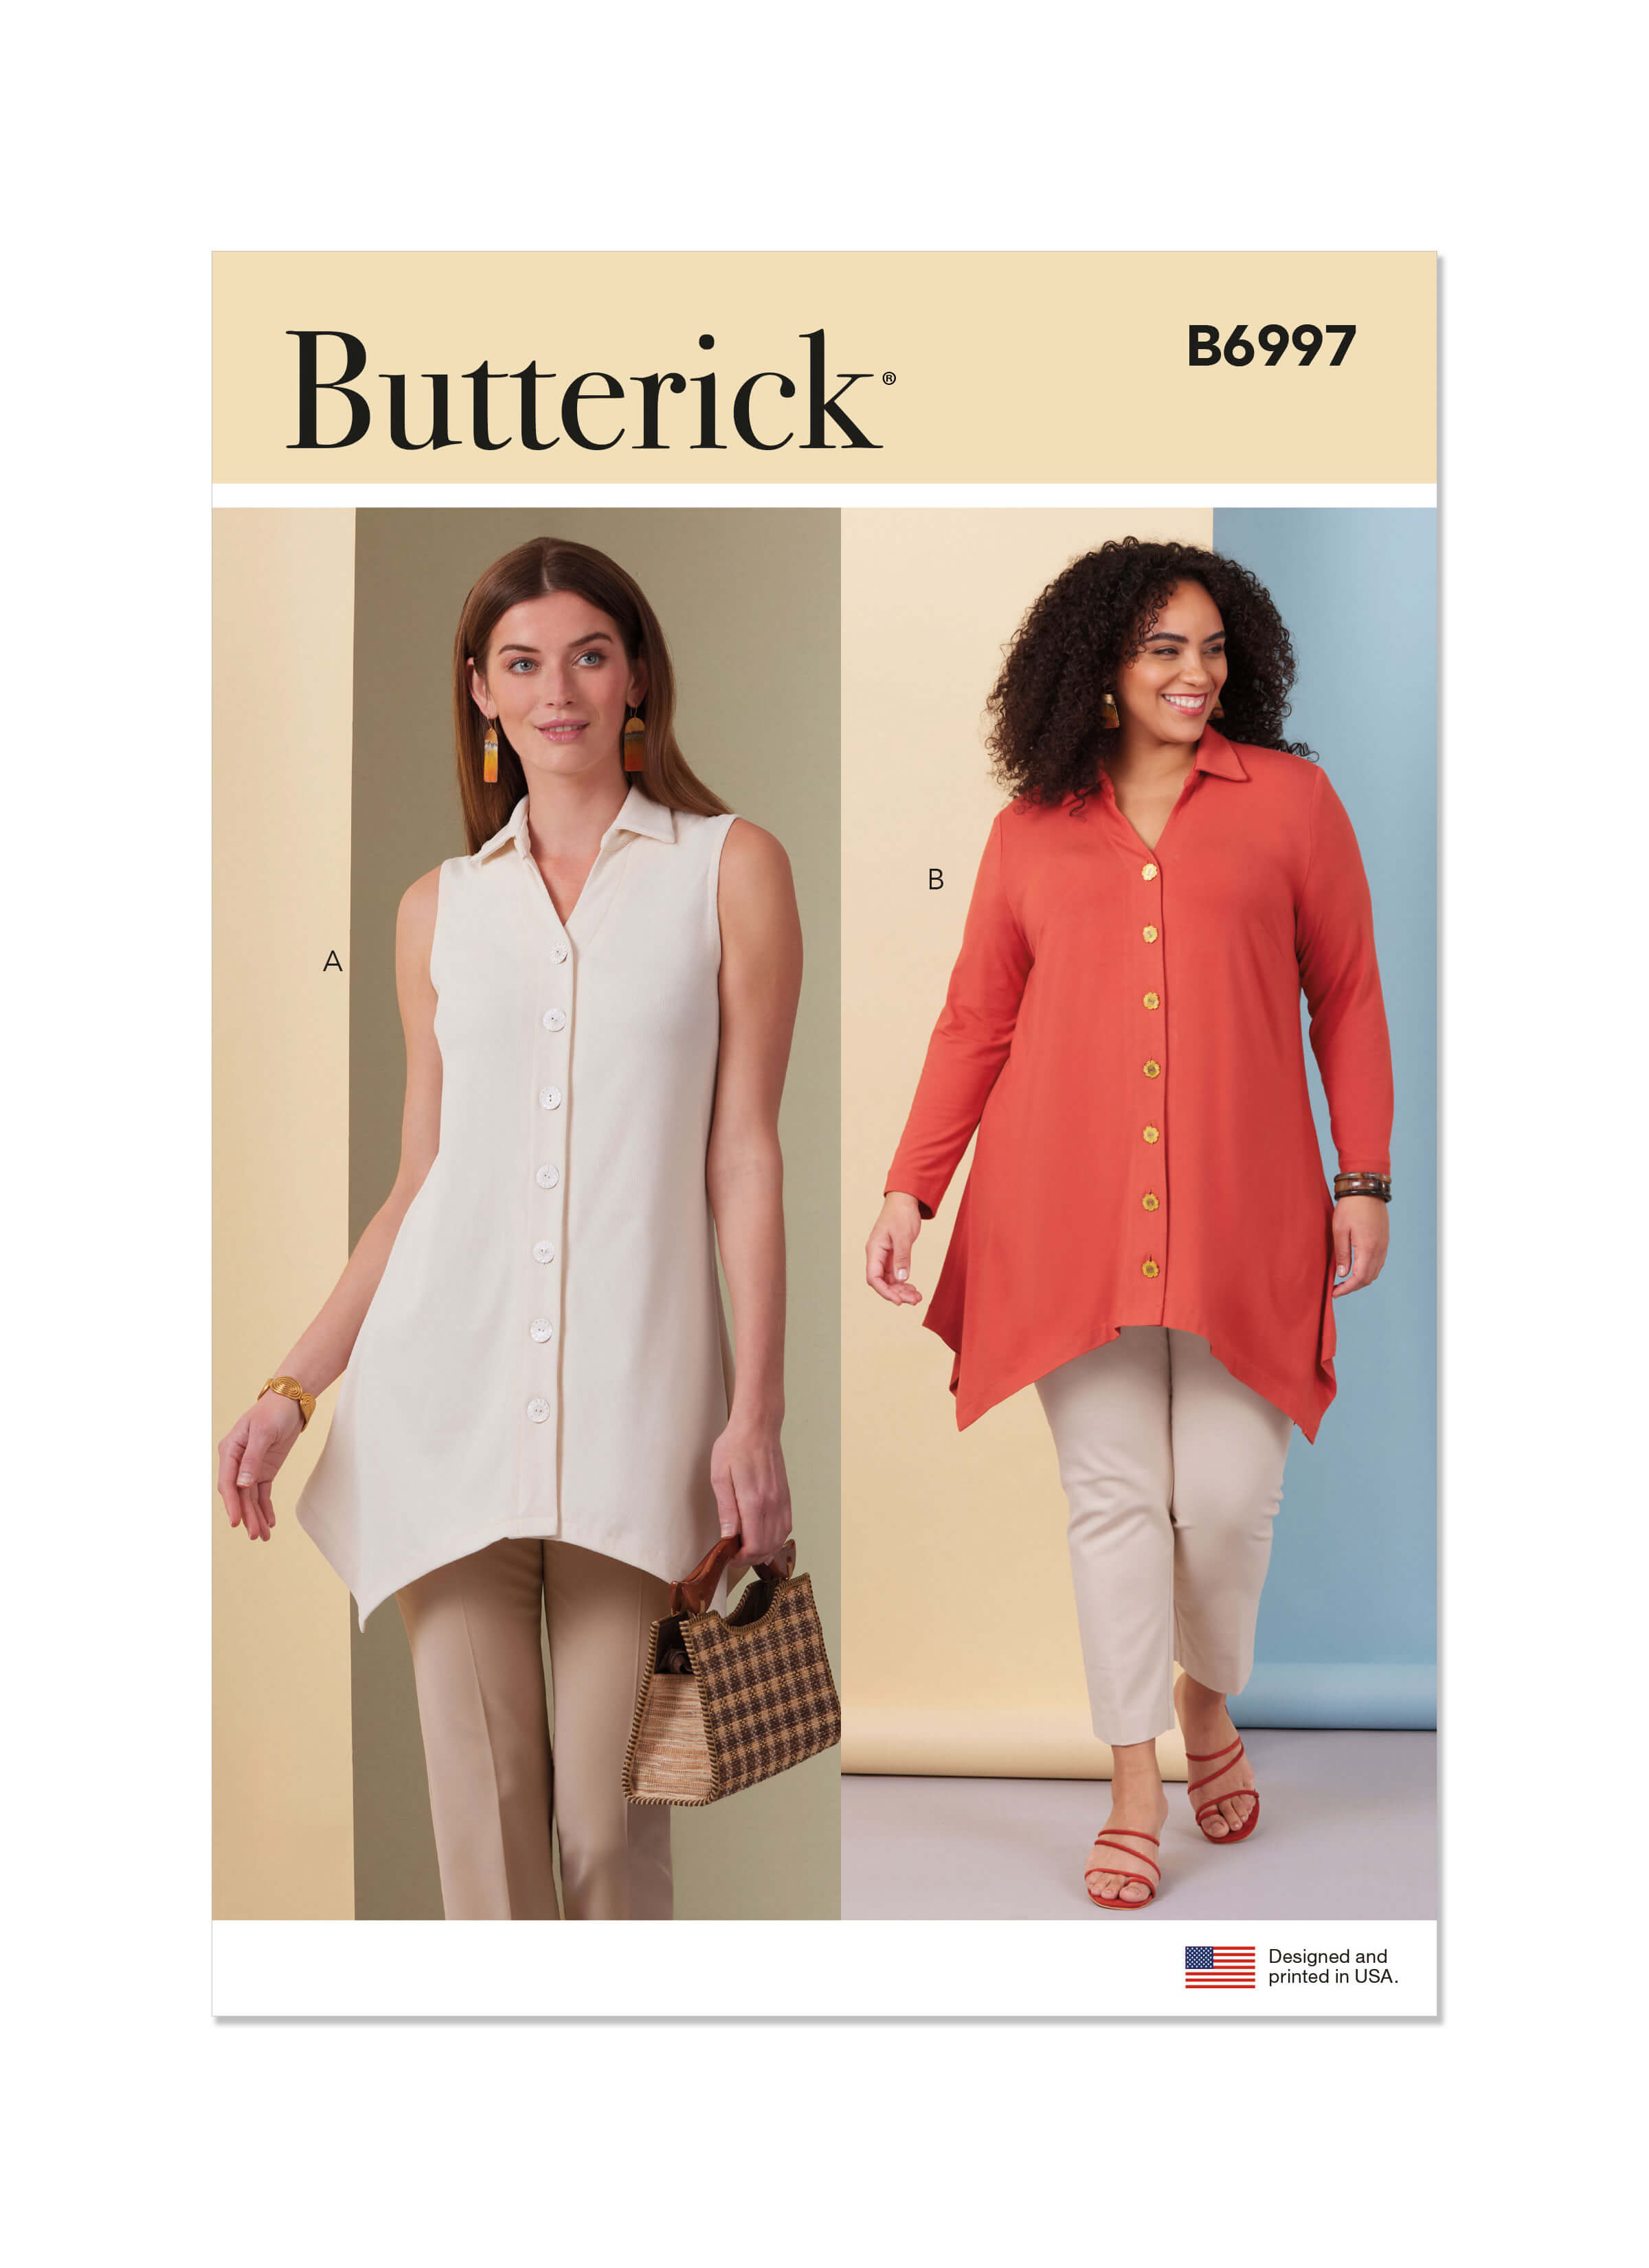 Butterick Sewing Pattern B6997 Misses' and Women's Knit Tops